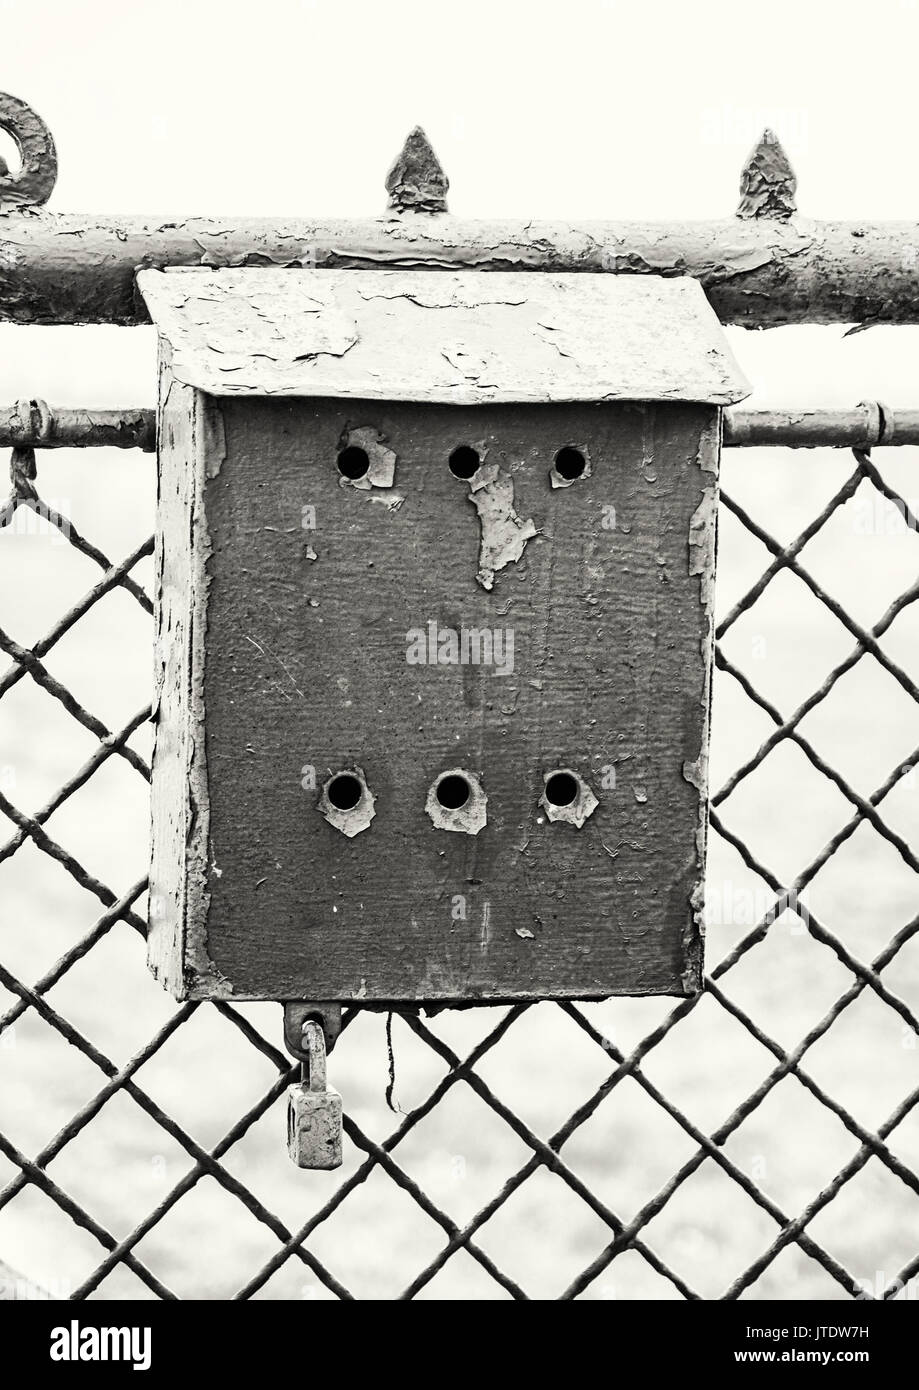 Old metallic mailbox on the fence. Mail delivery. Black and white photo. Stock Photo